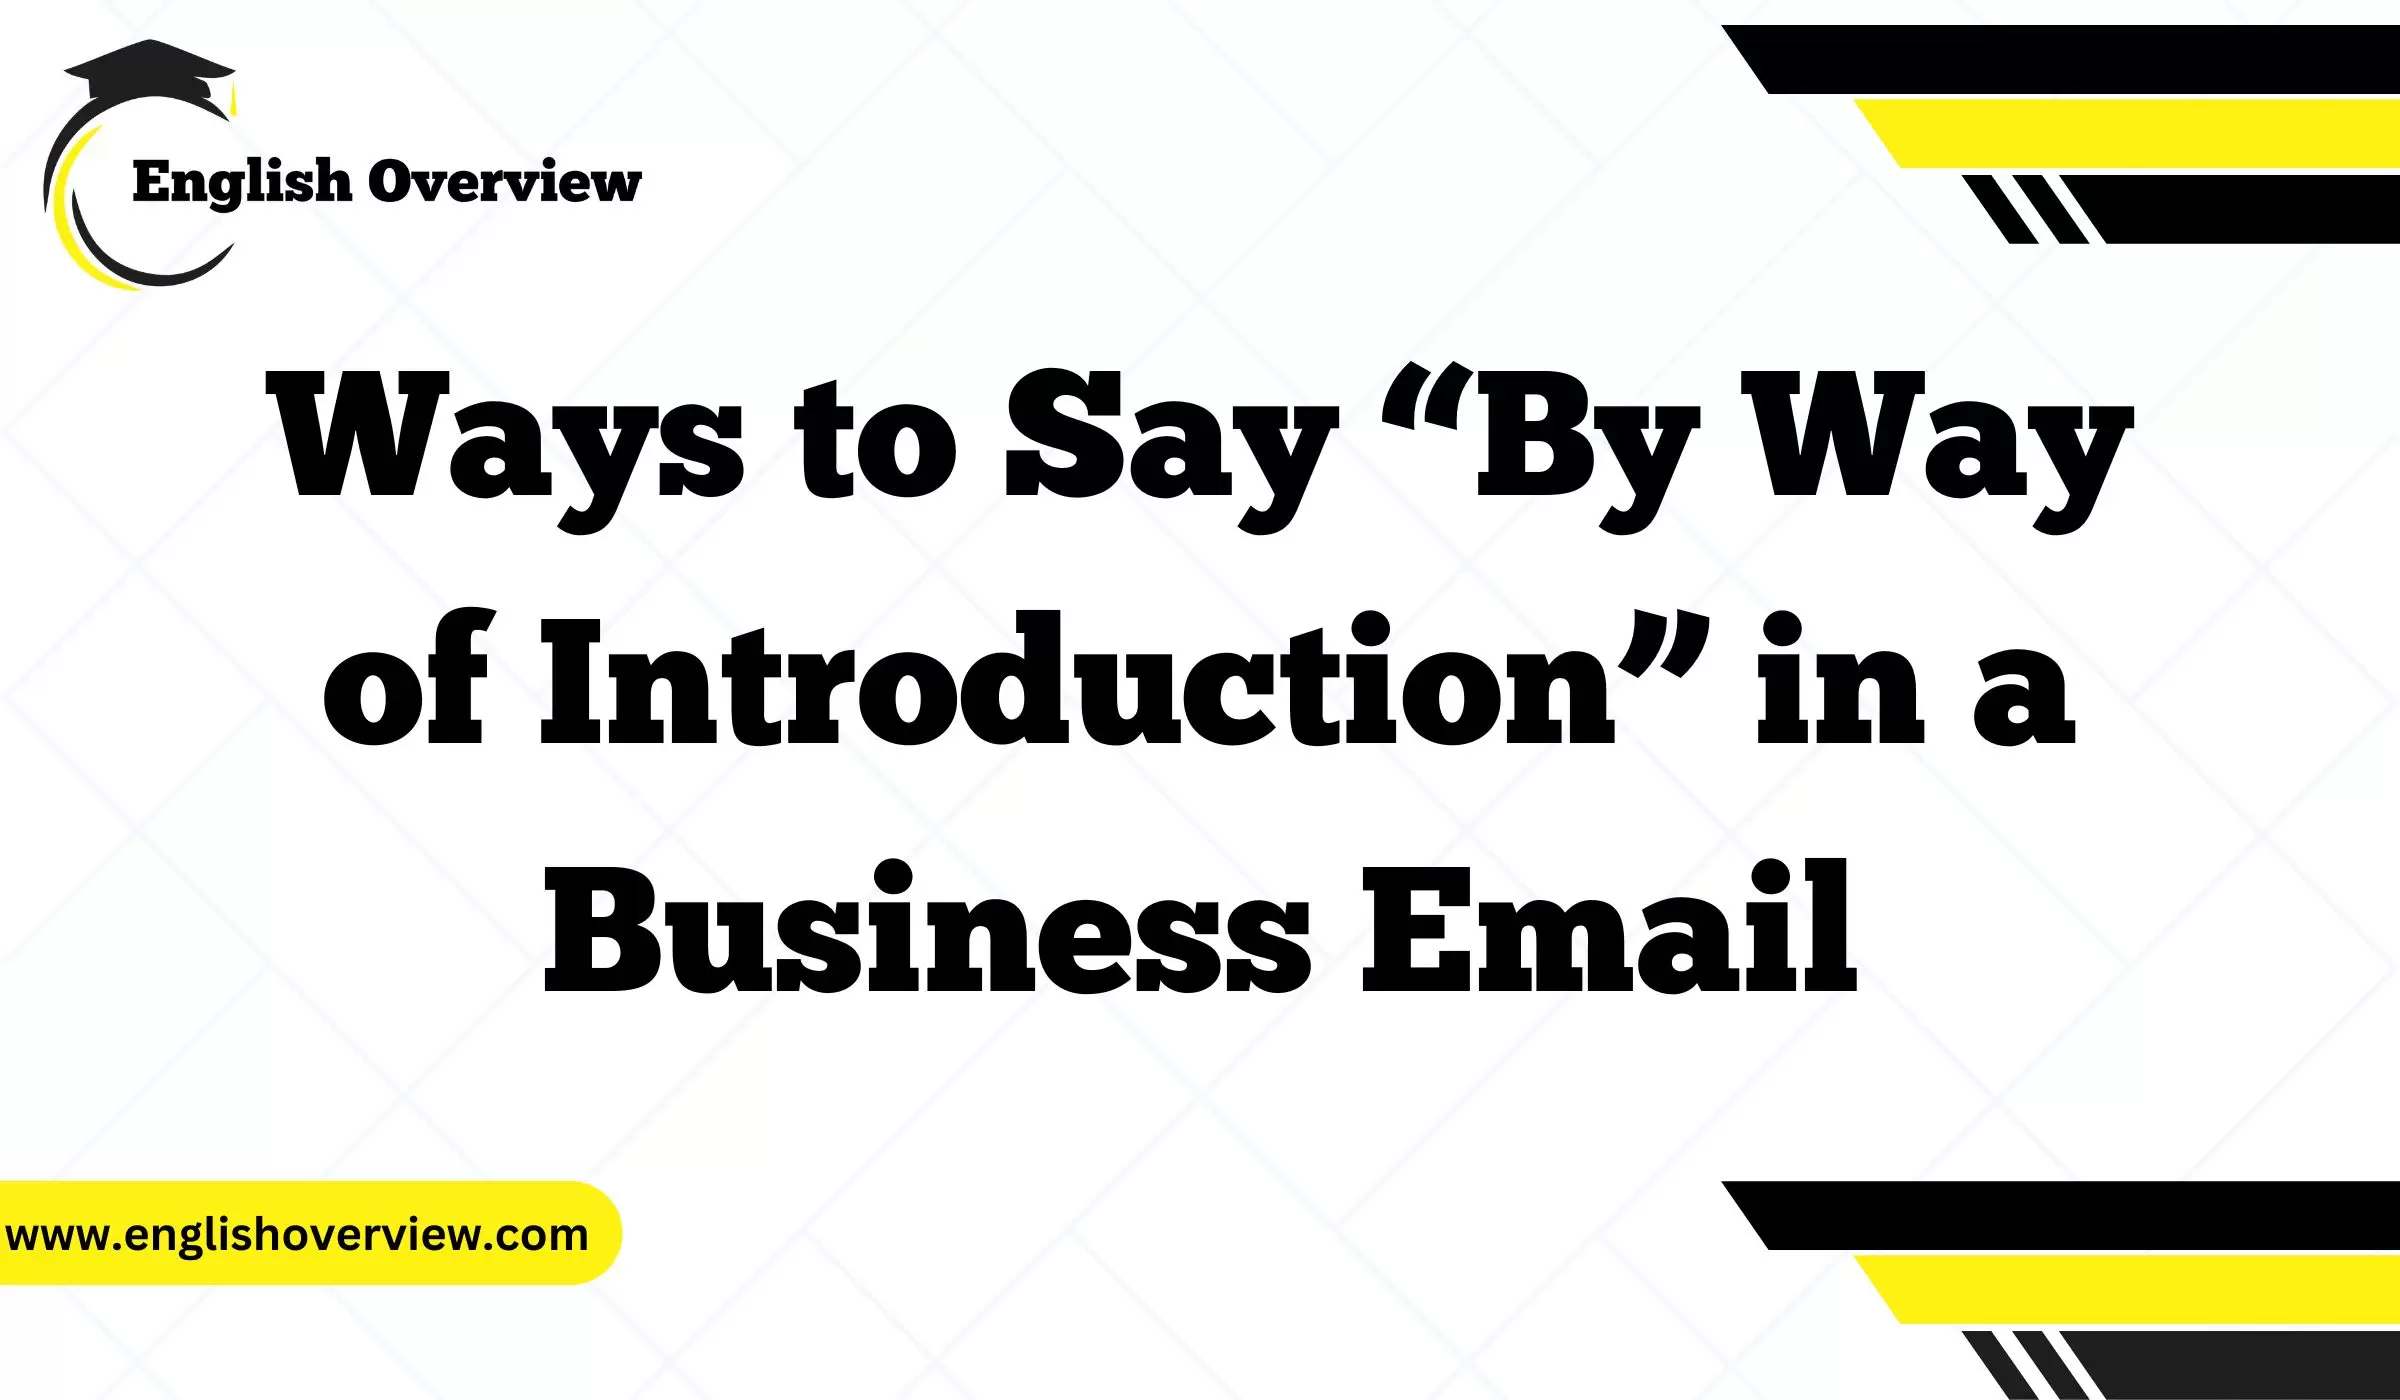 Ways to Say “By Way of Introduction” in a Business Email